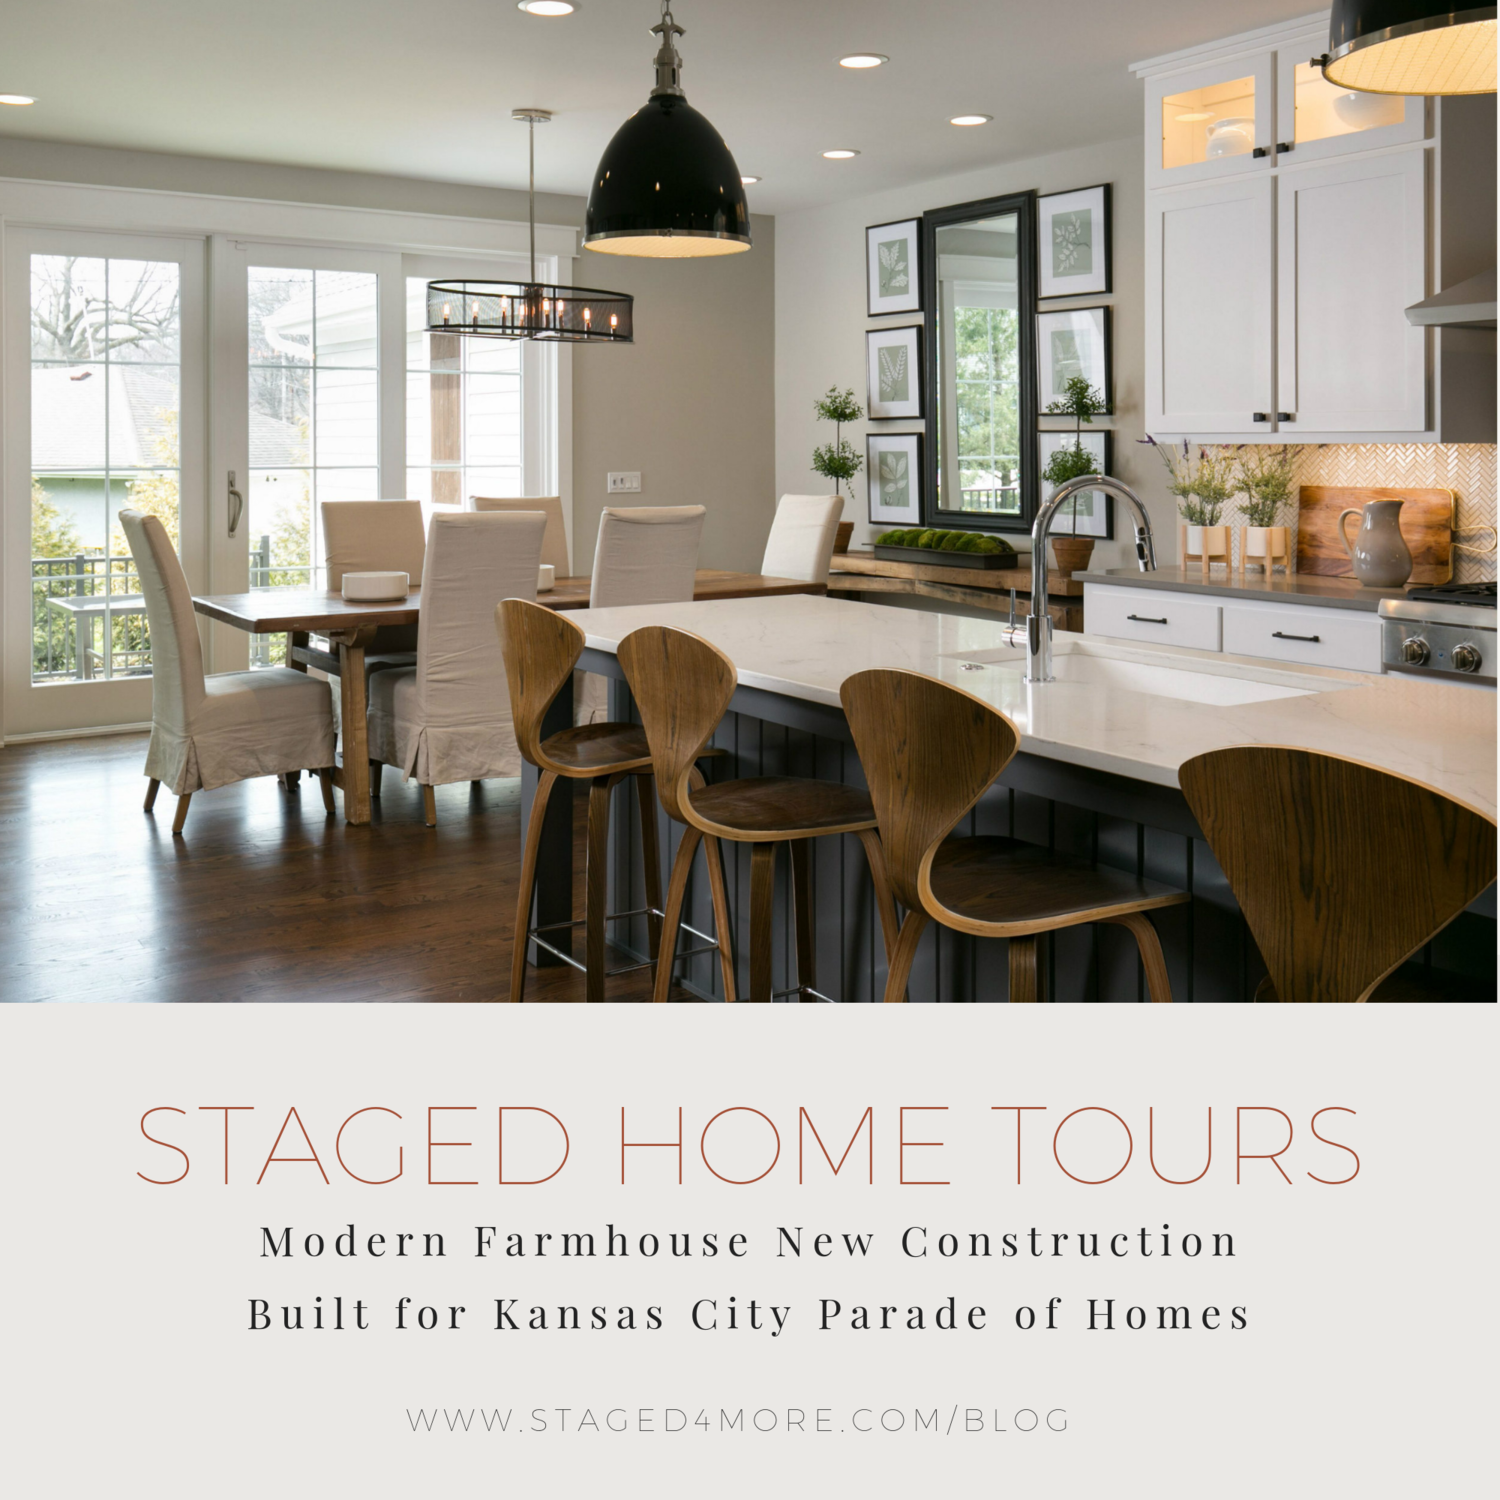 Staged+Home+Tour_+Modern+Farmhouse+New+Construction+Built+for+Kansas+City+Parade+of+Homes+_+Staged4more+School+of+Home+Staging.png